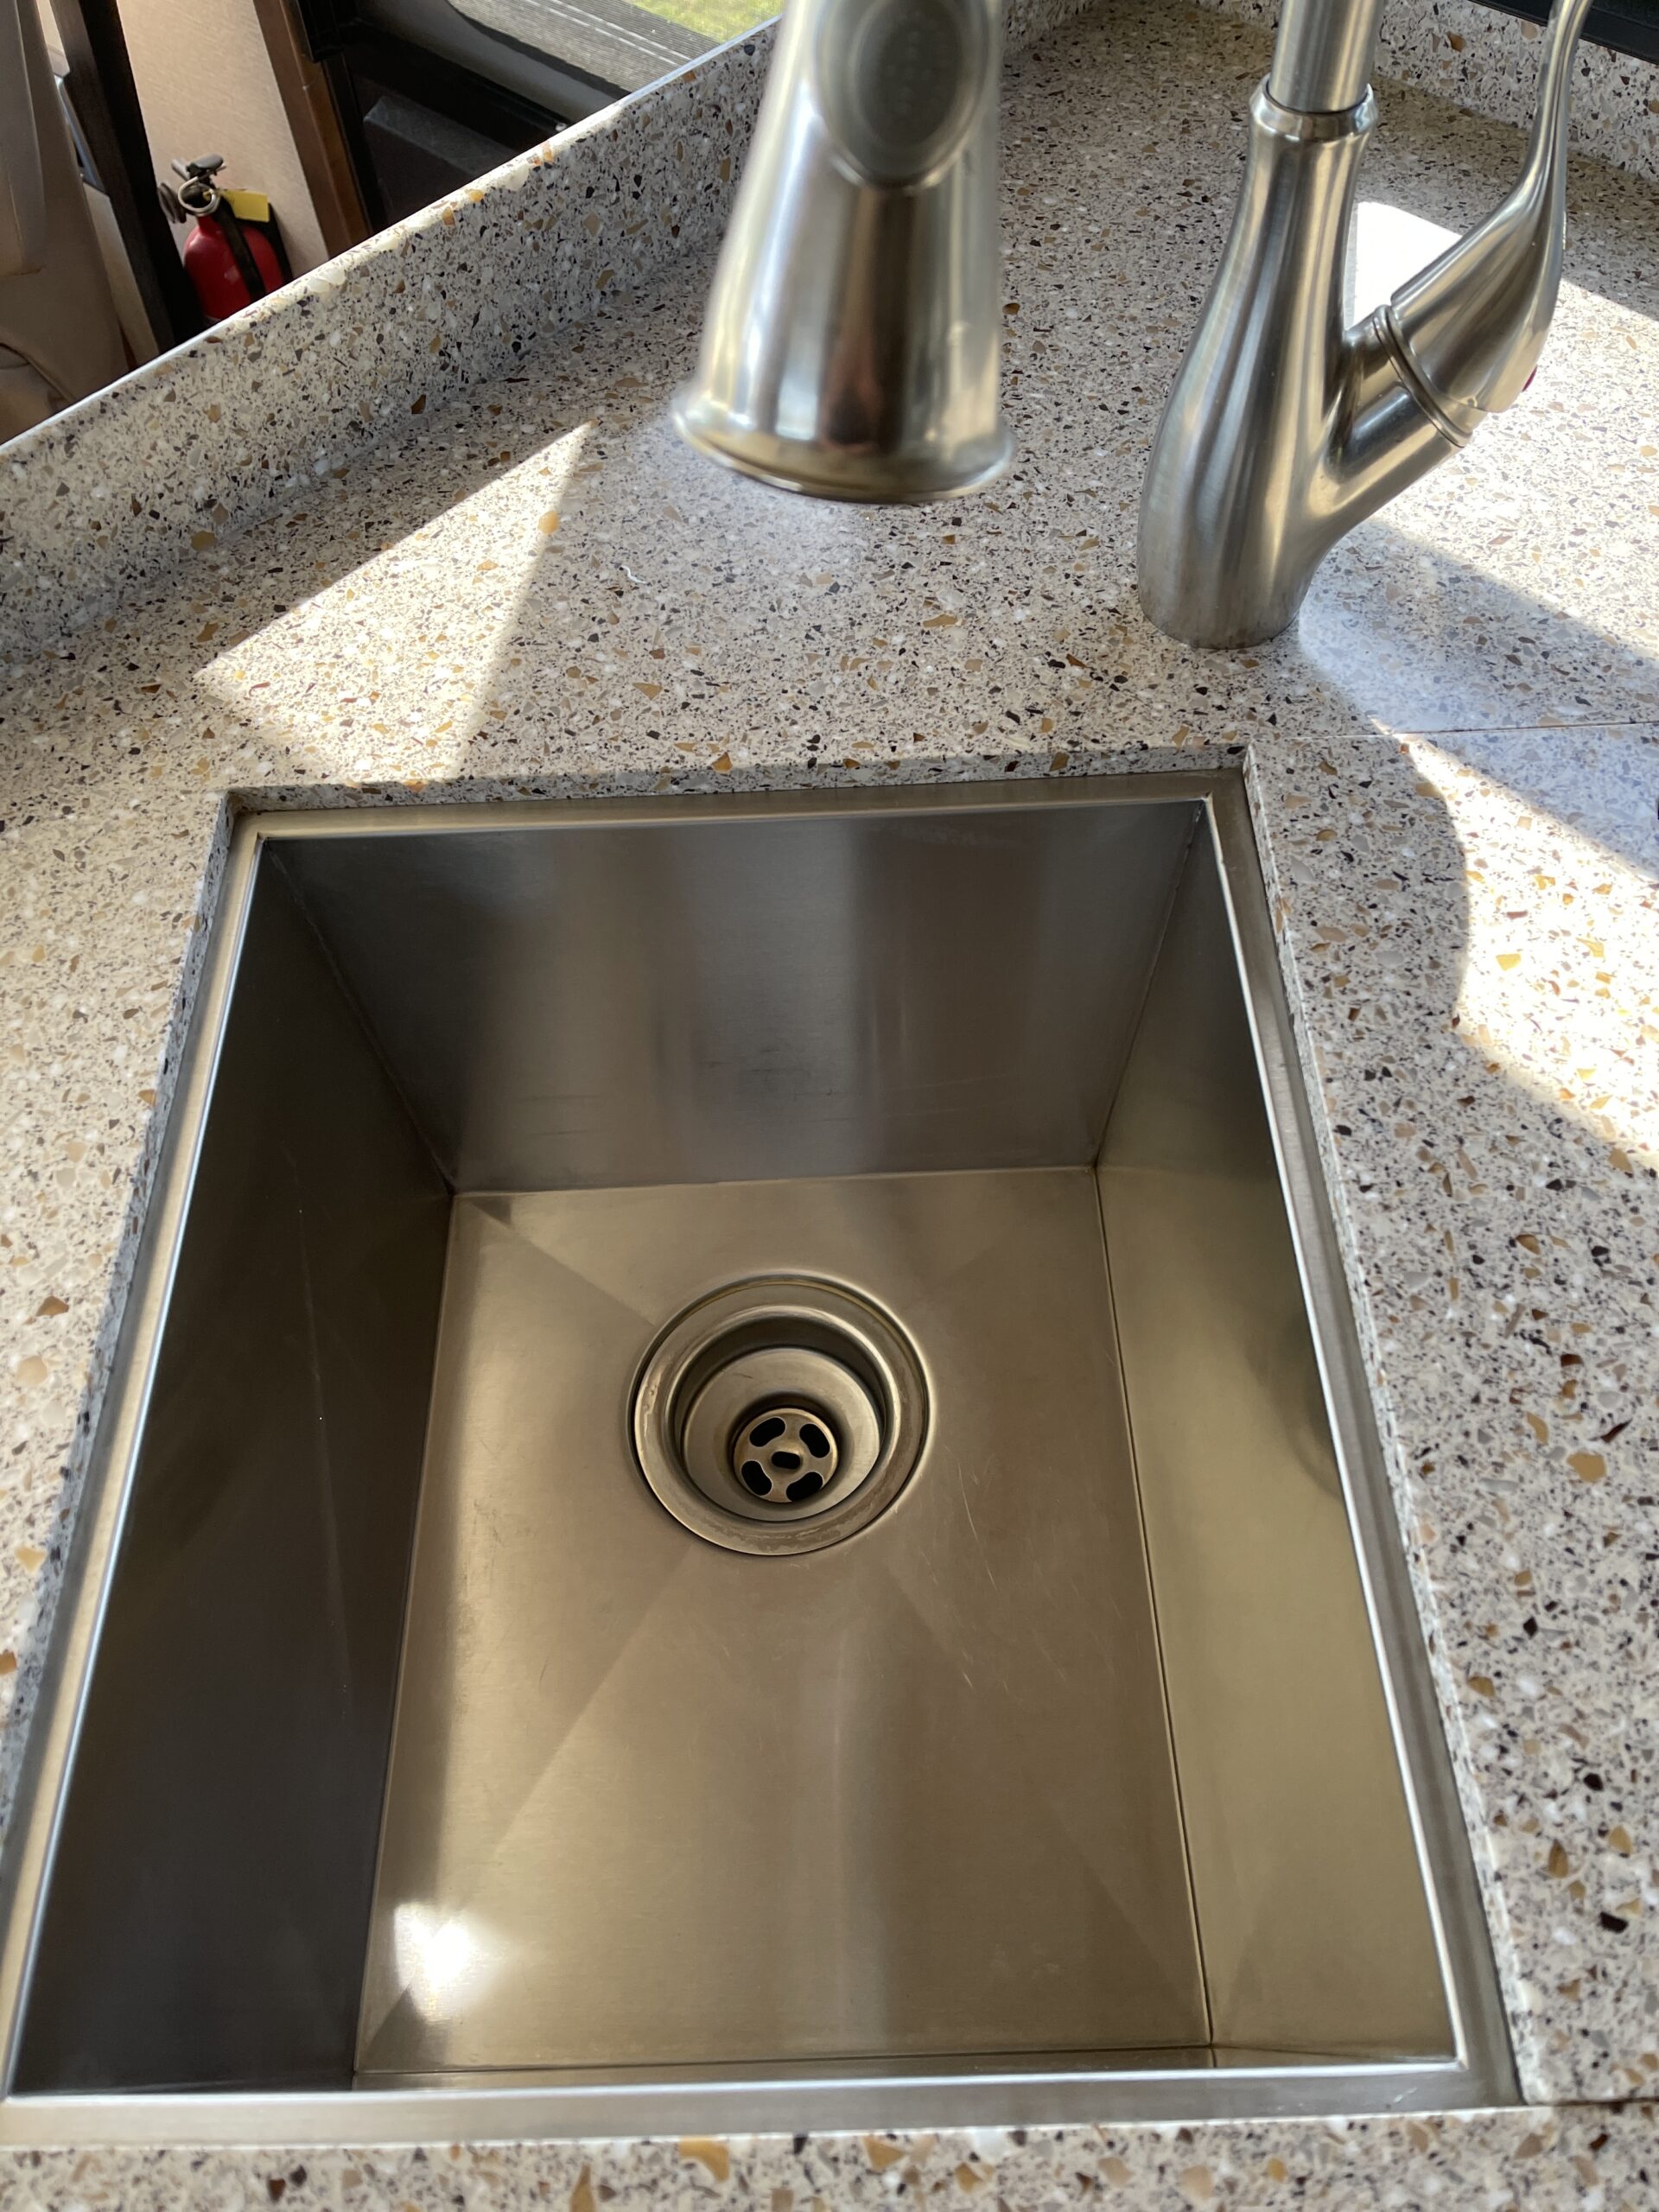 stainless steel sinks require extra effort to keep them shiny